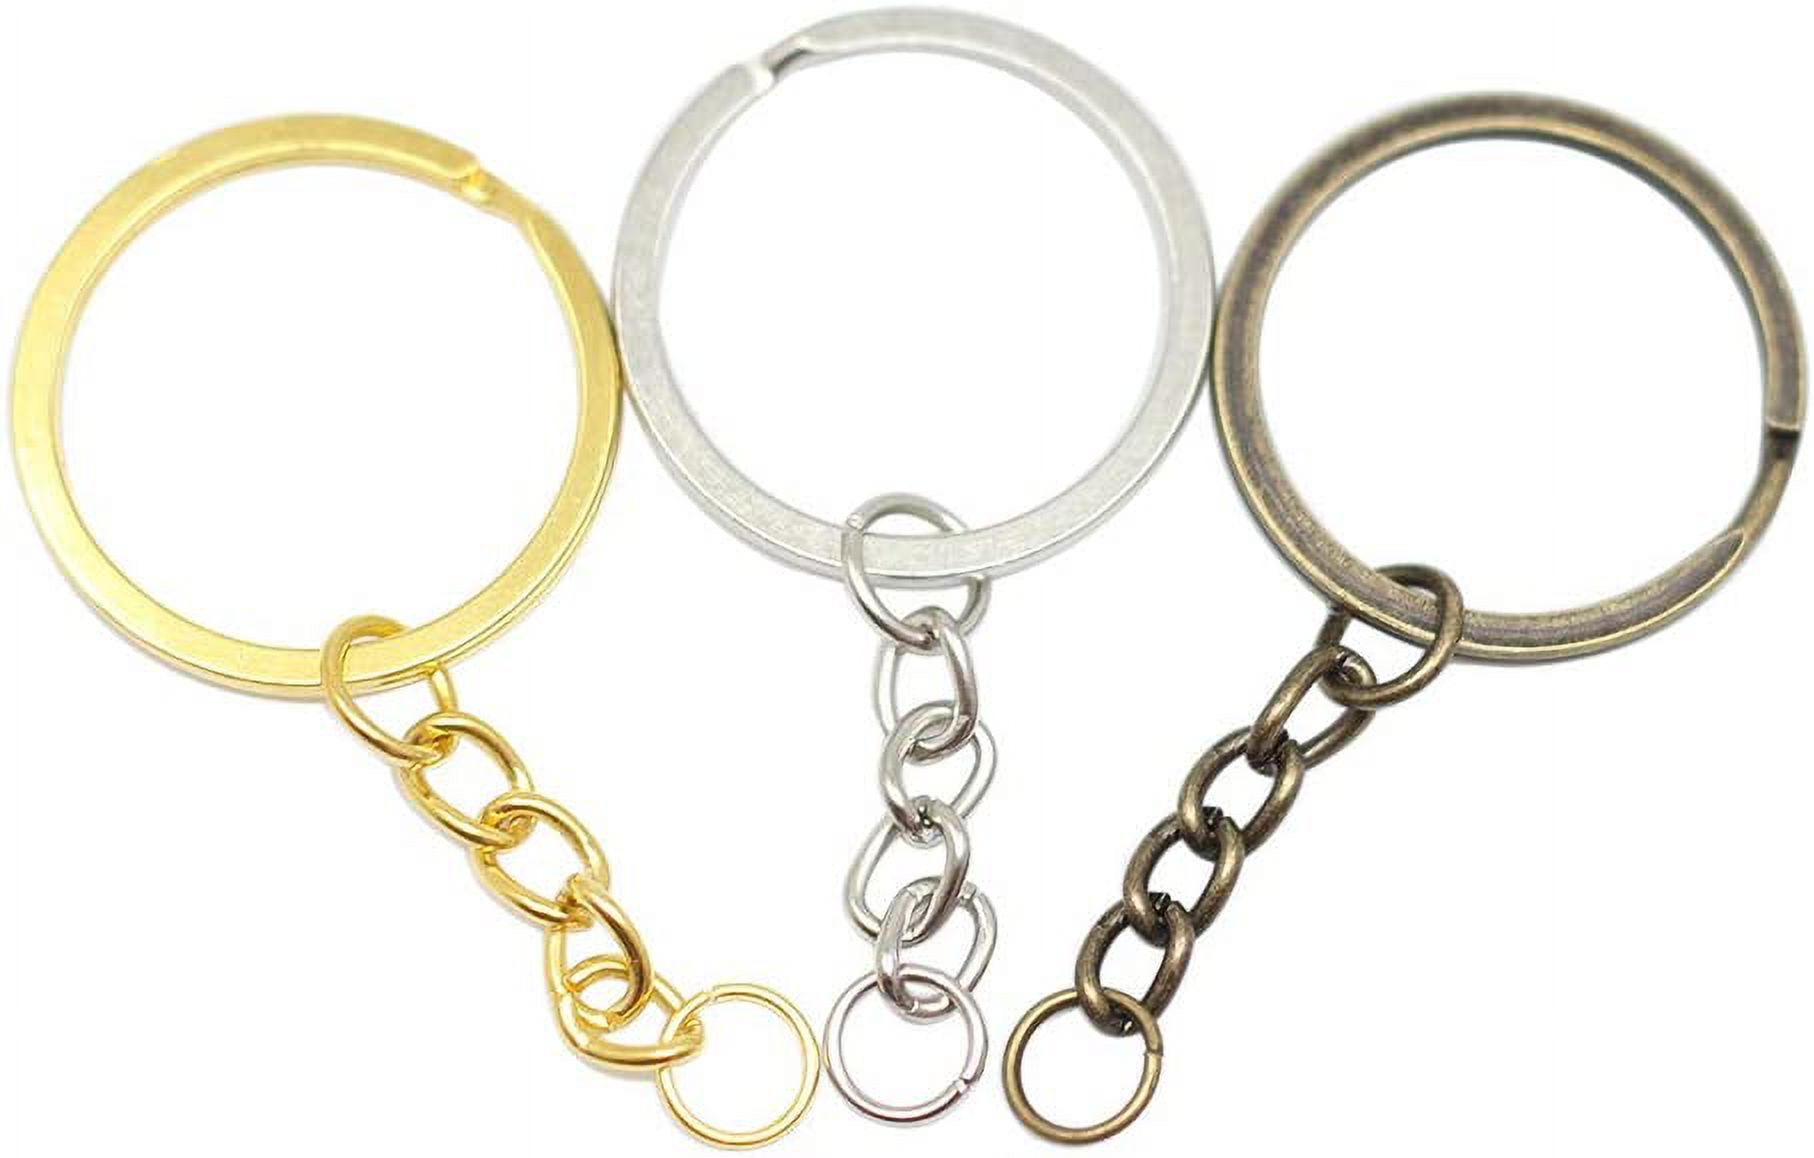 Suuchh 10 Pcs/Lot Split Key Ring with Chain and Jump Rings 60mm Long Round Split Keychain Keyrings Jewelry Making Bulk 3 Sizes(Antique Bronze, 30mm(